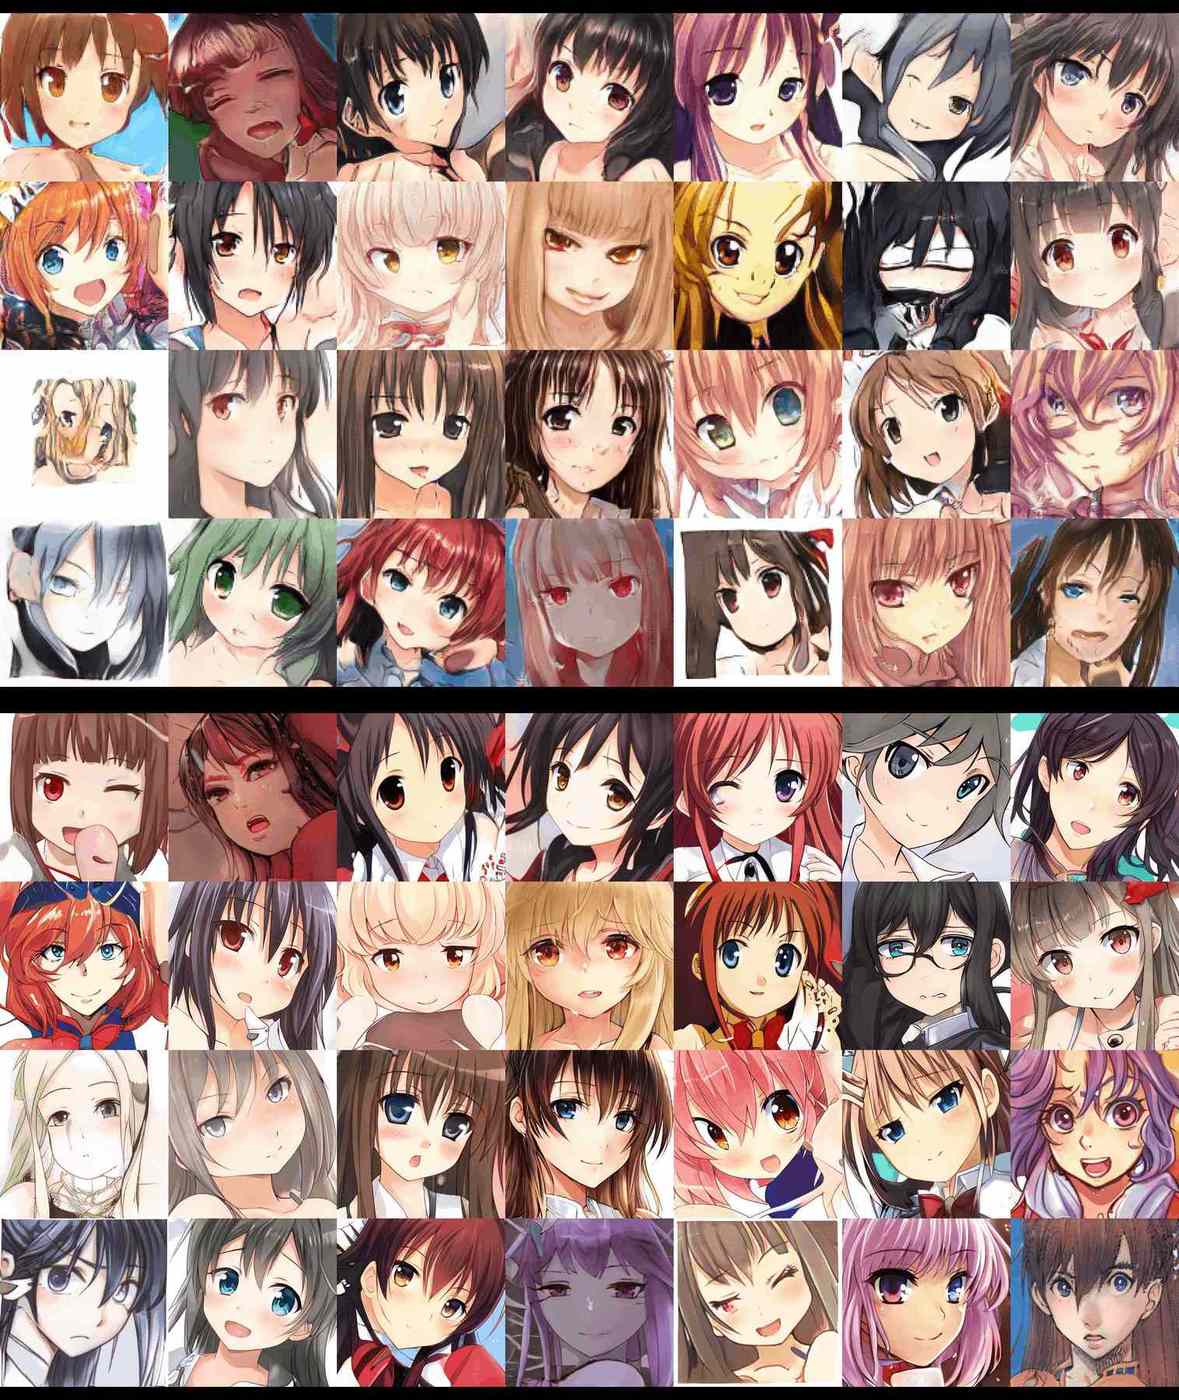 Training improvements: 256px StyleGAN anime faces after ~46 GPU-hours (top) vs 512px anime faces after 382 GPU-hours (bottom); see also the video montage of first 9k iterations